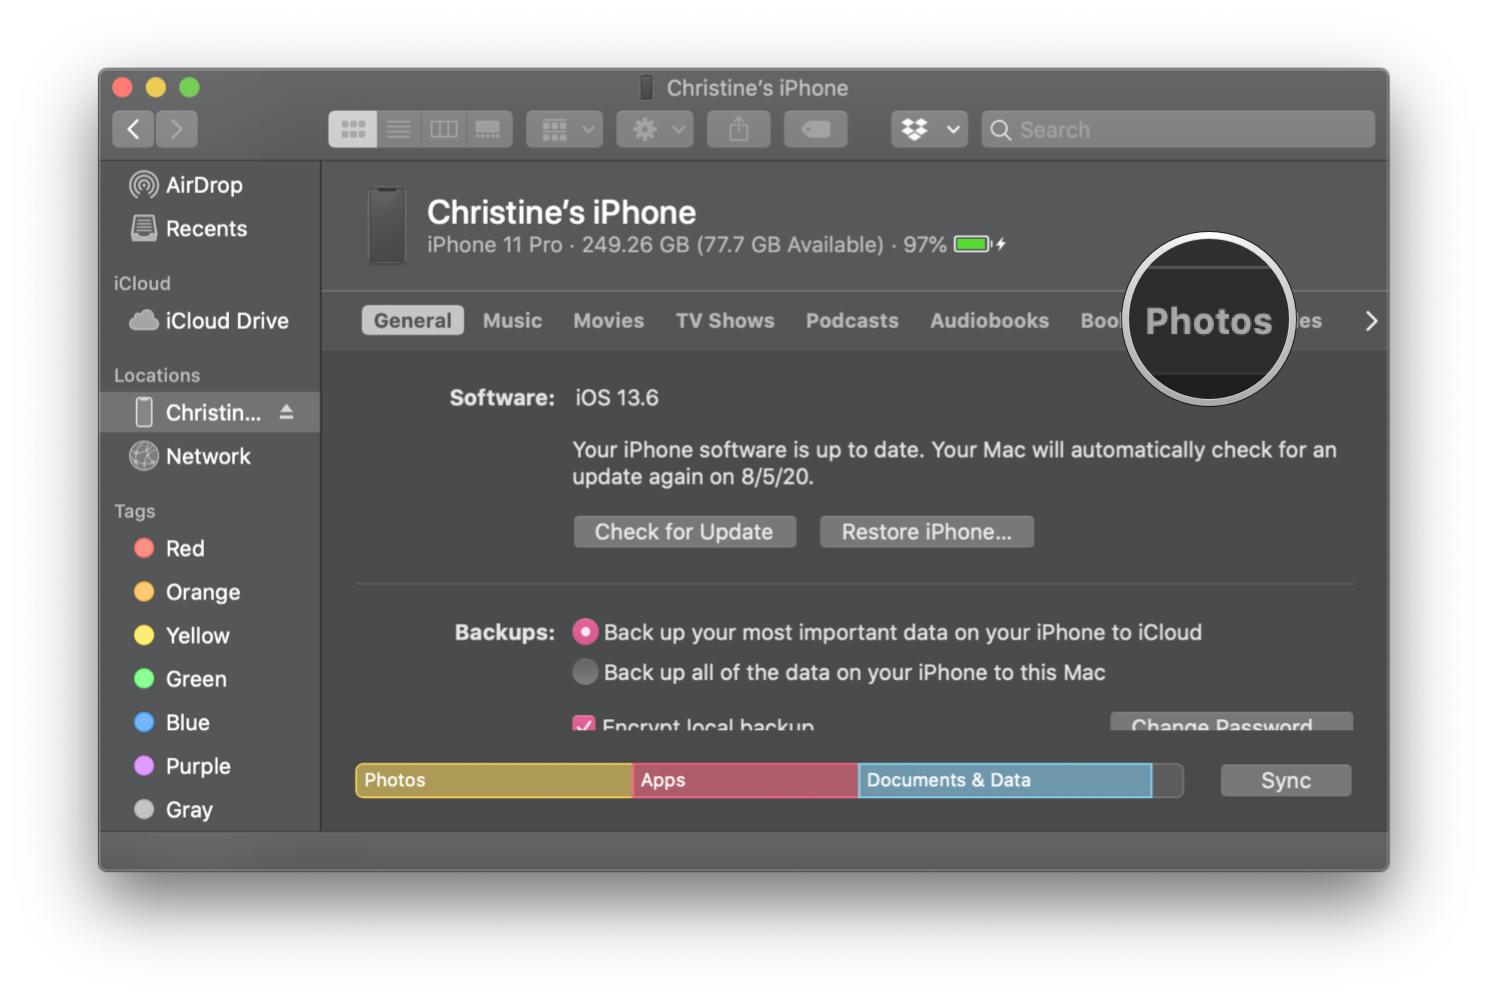 Upload photos and videos via iTunes and Finder by showing steps: Click Photos under your device